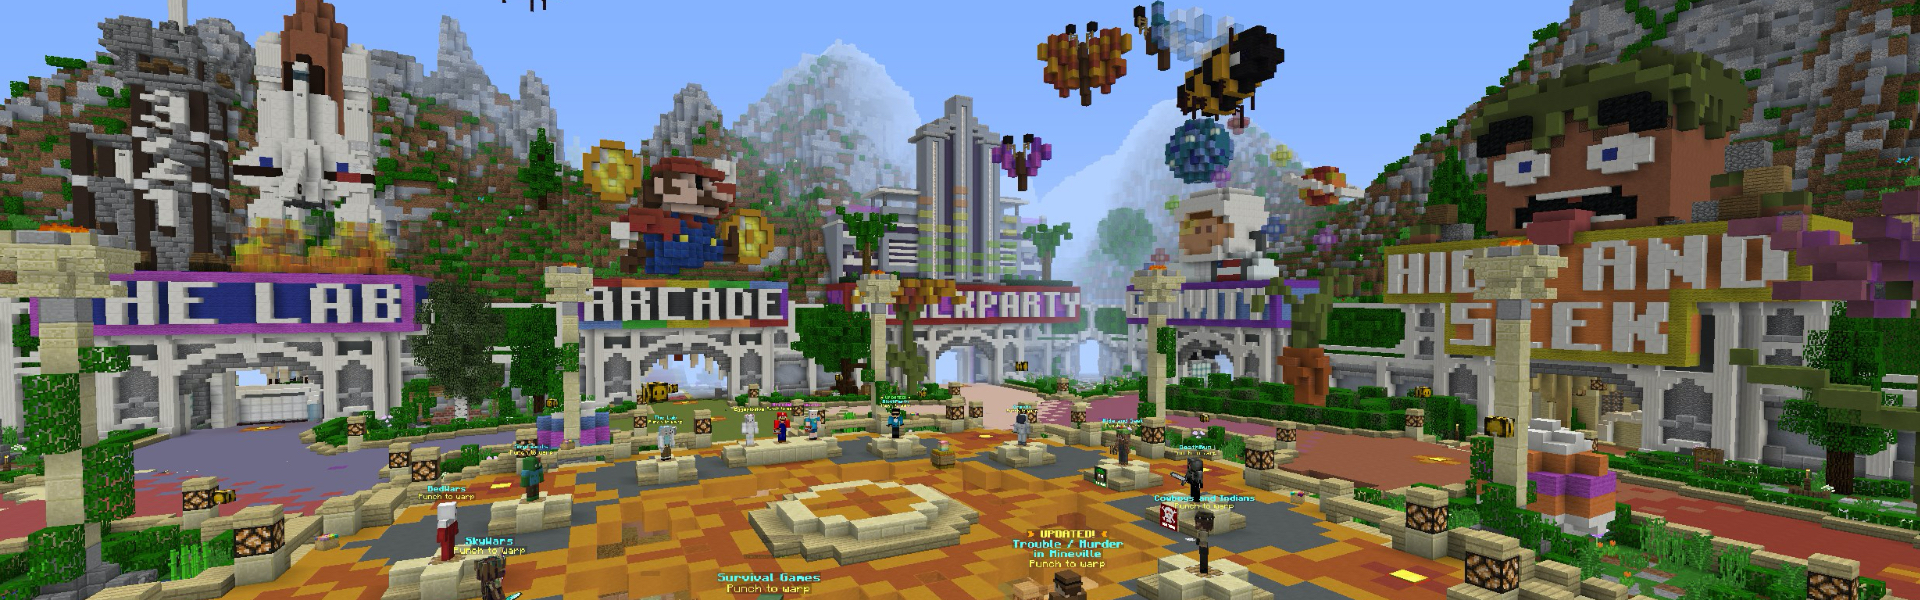 the hive minecraft server download